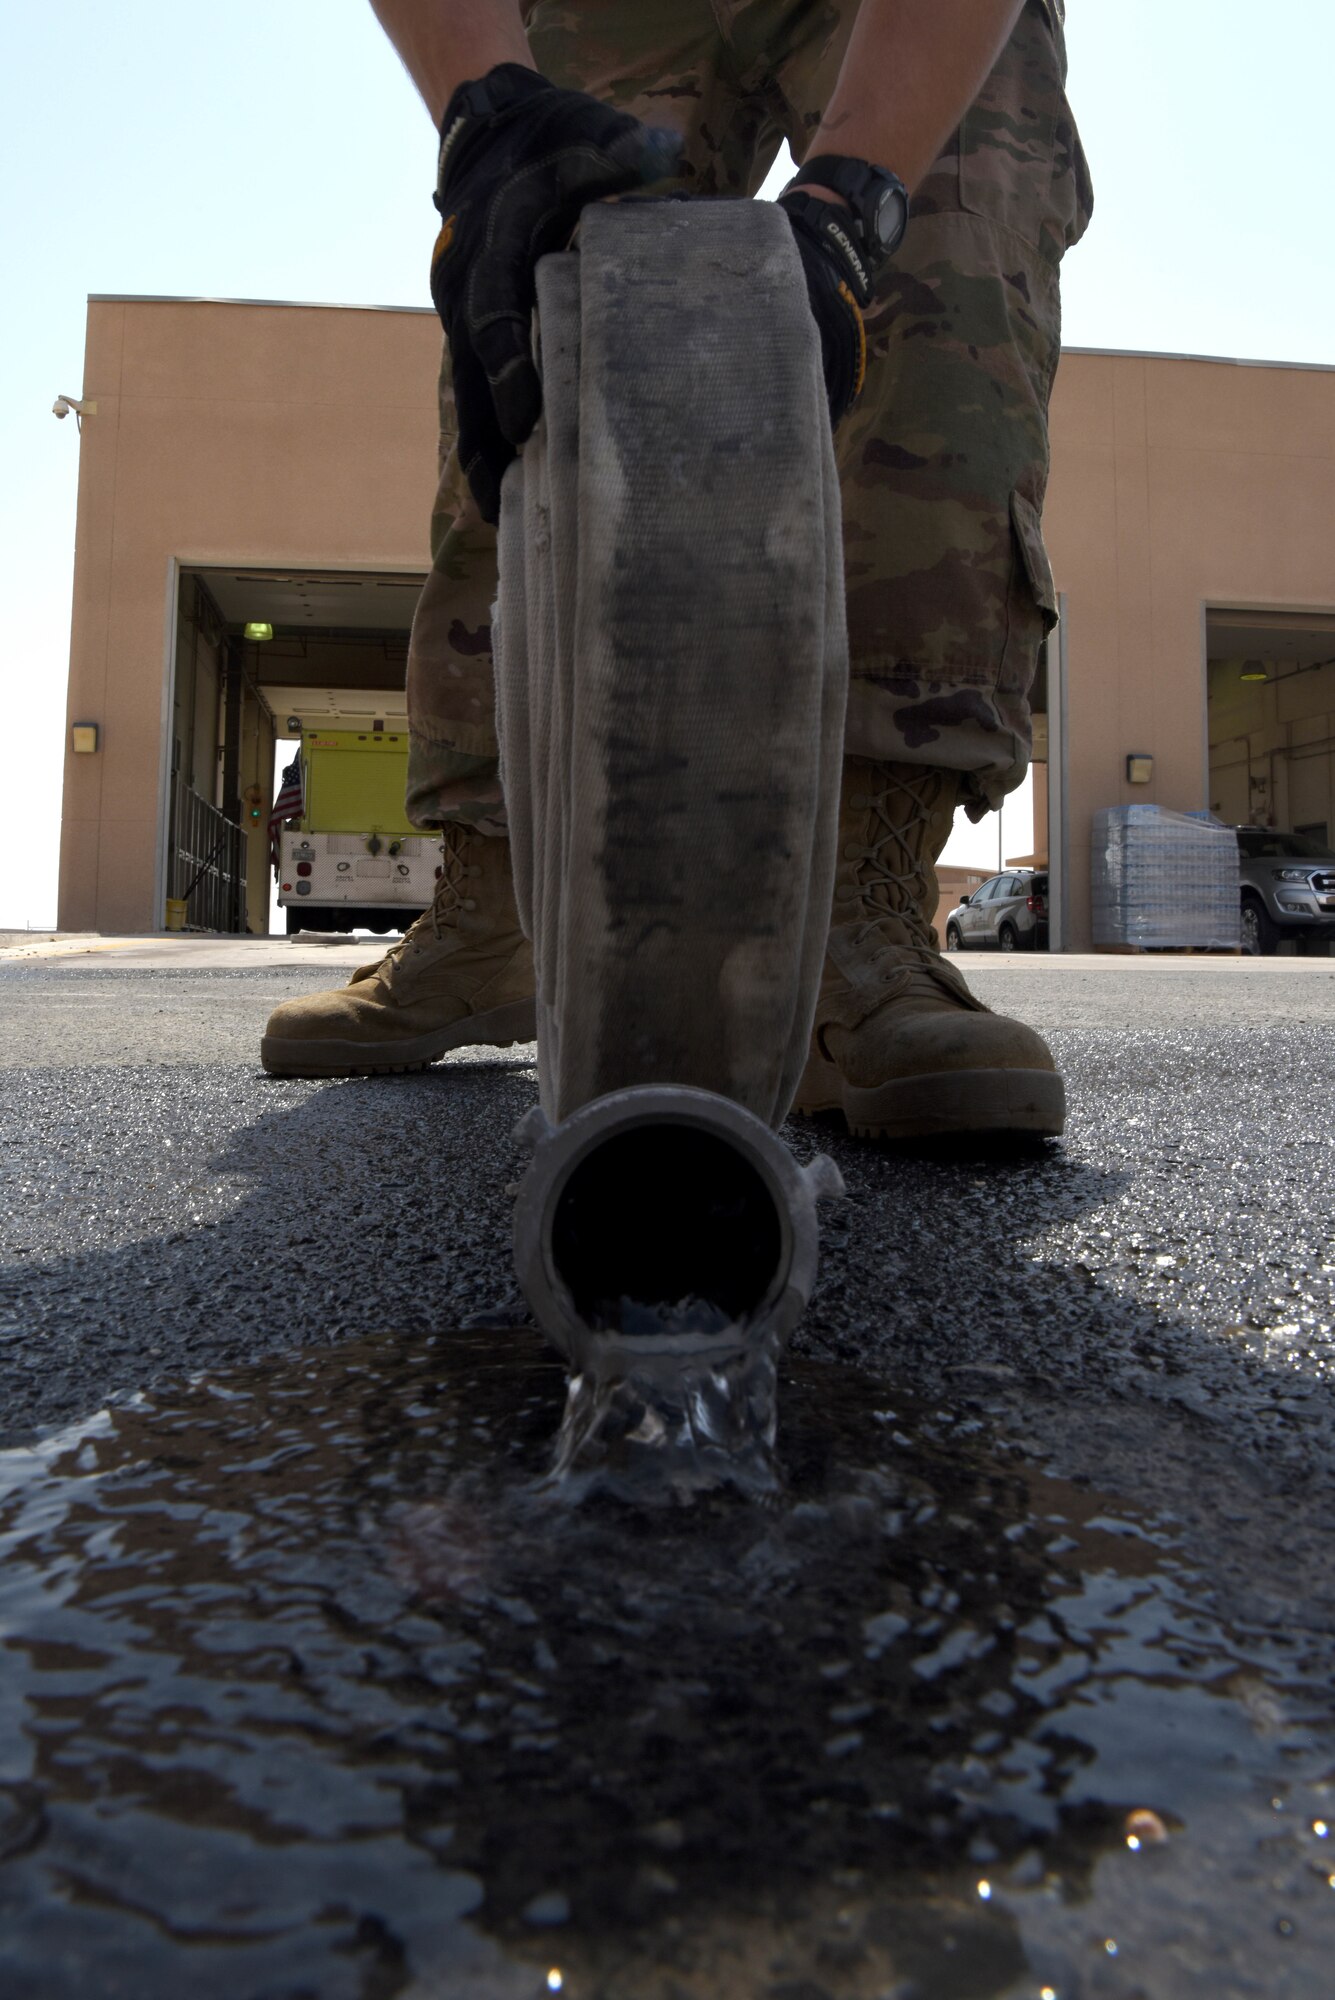 Staff Sgt. John Huaman, 379th Expeditionary Civil Engineer Squadron engine operator rolls up a fire hose on June 6, 2019, at Al Udeid Air Base, Qatar. The 100-foot hand line is broken into 50-foot lengths and is drained and rolled after each use. (U.S. Air Force photo by Staff Sgt. Ashley L. Gardner)